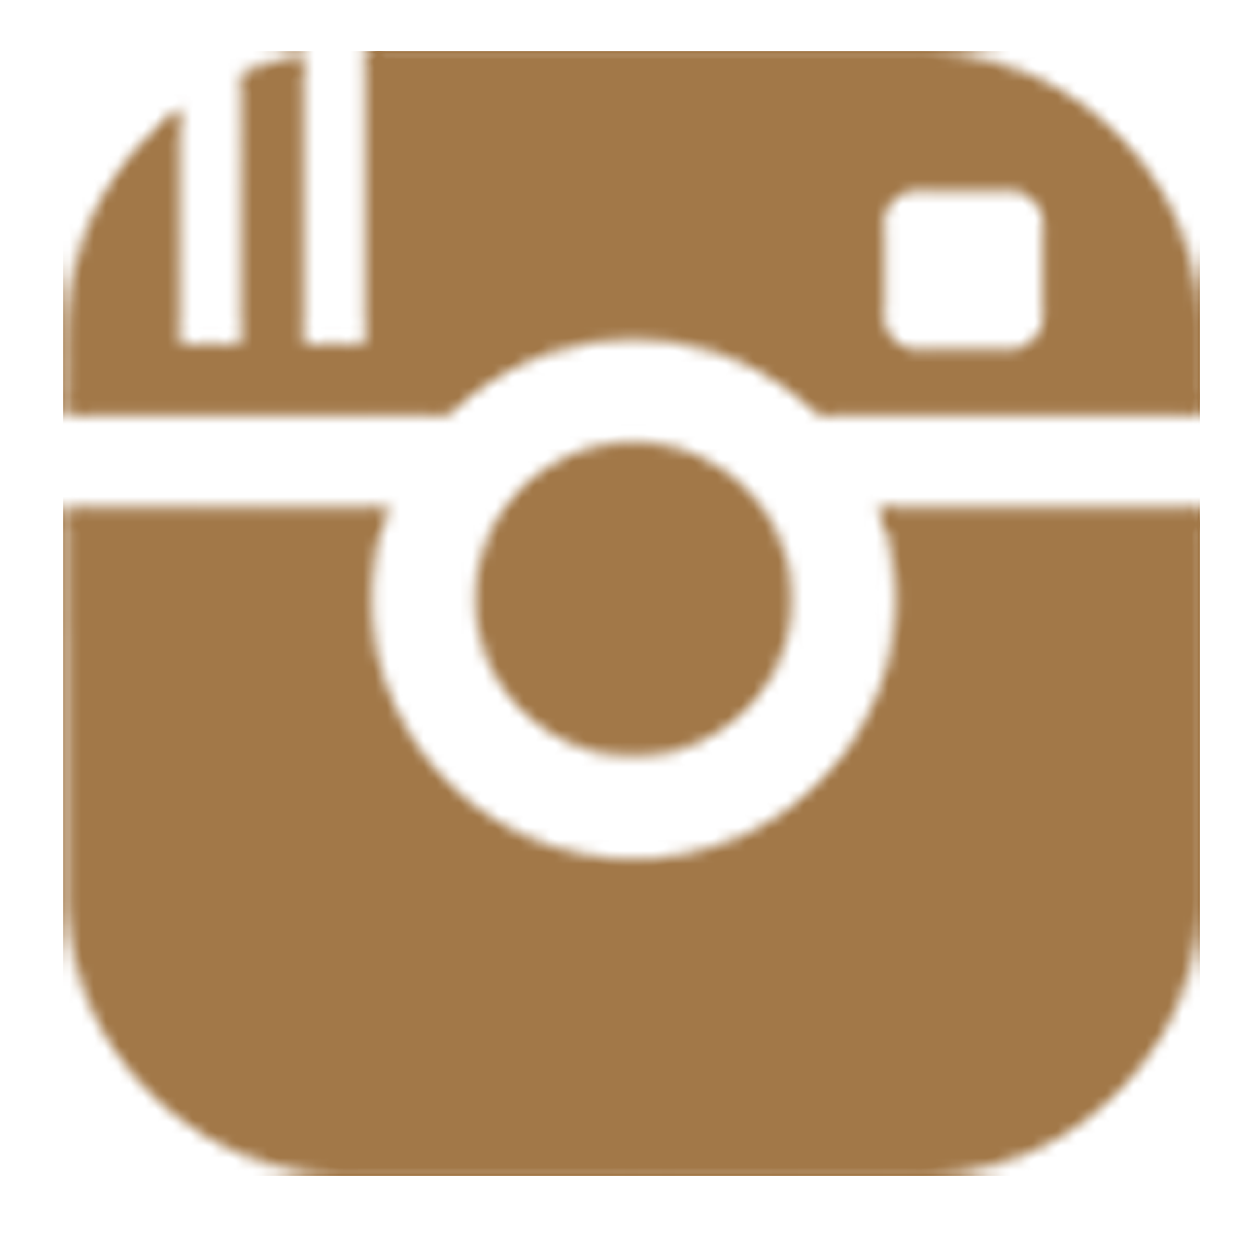 Graphic Instagram Icons Computer Design Logo PNG Image